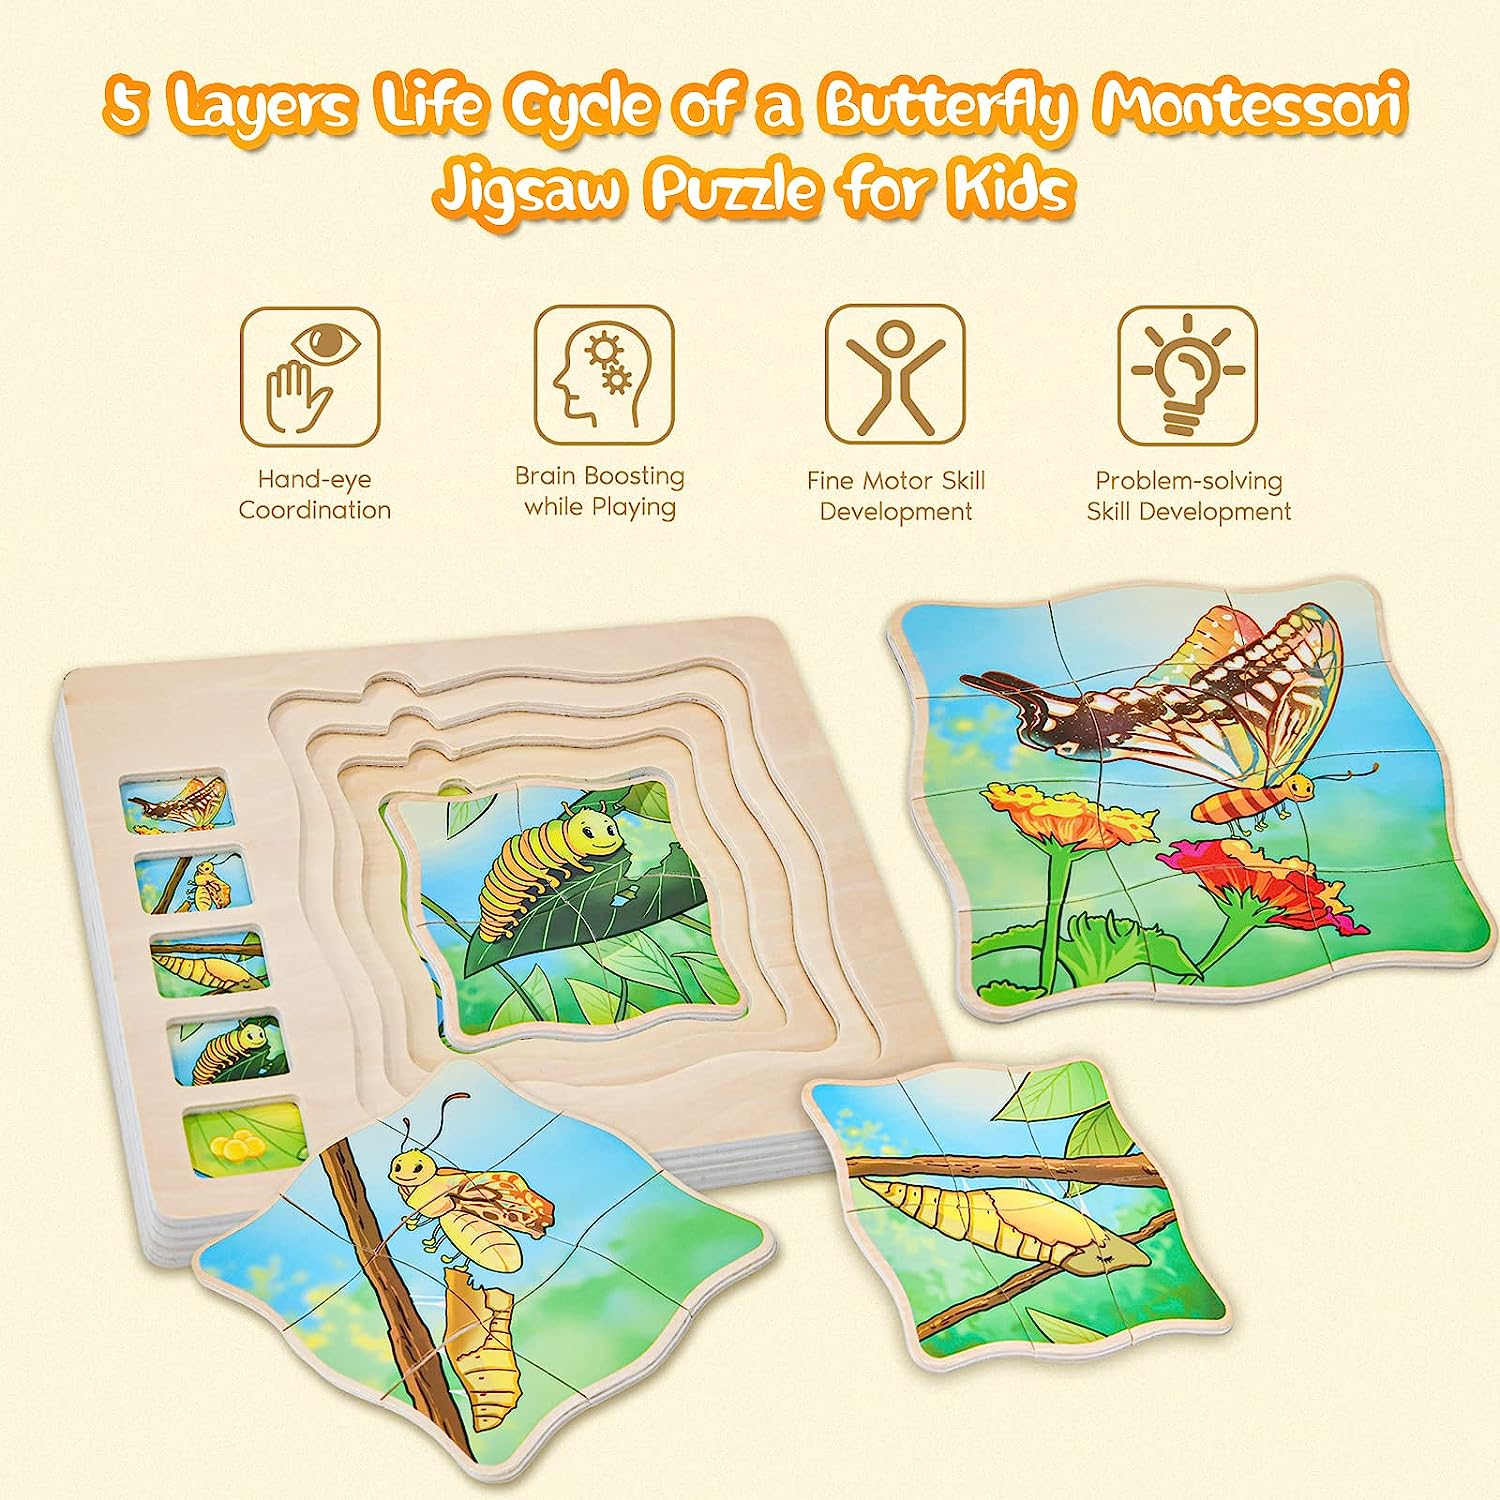 Wooden Puzzles for Kids Ages 4-8, 5 Layers Life Cycle of a Butterfly Jigsaw Puzzle for Kids, Children Preschool Learning Educational Puzzles Toys for Boys and Girls